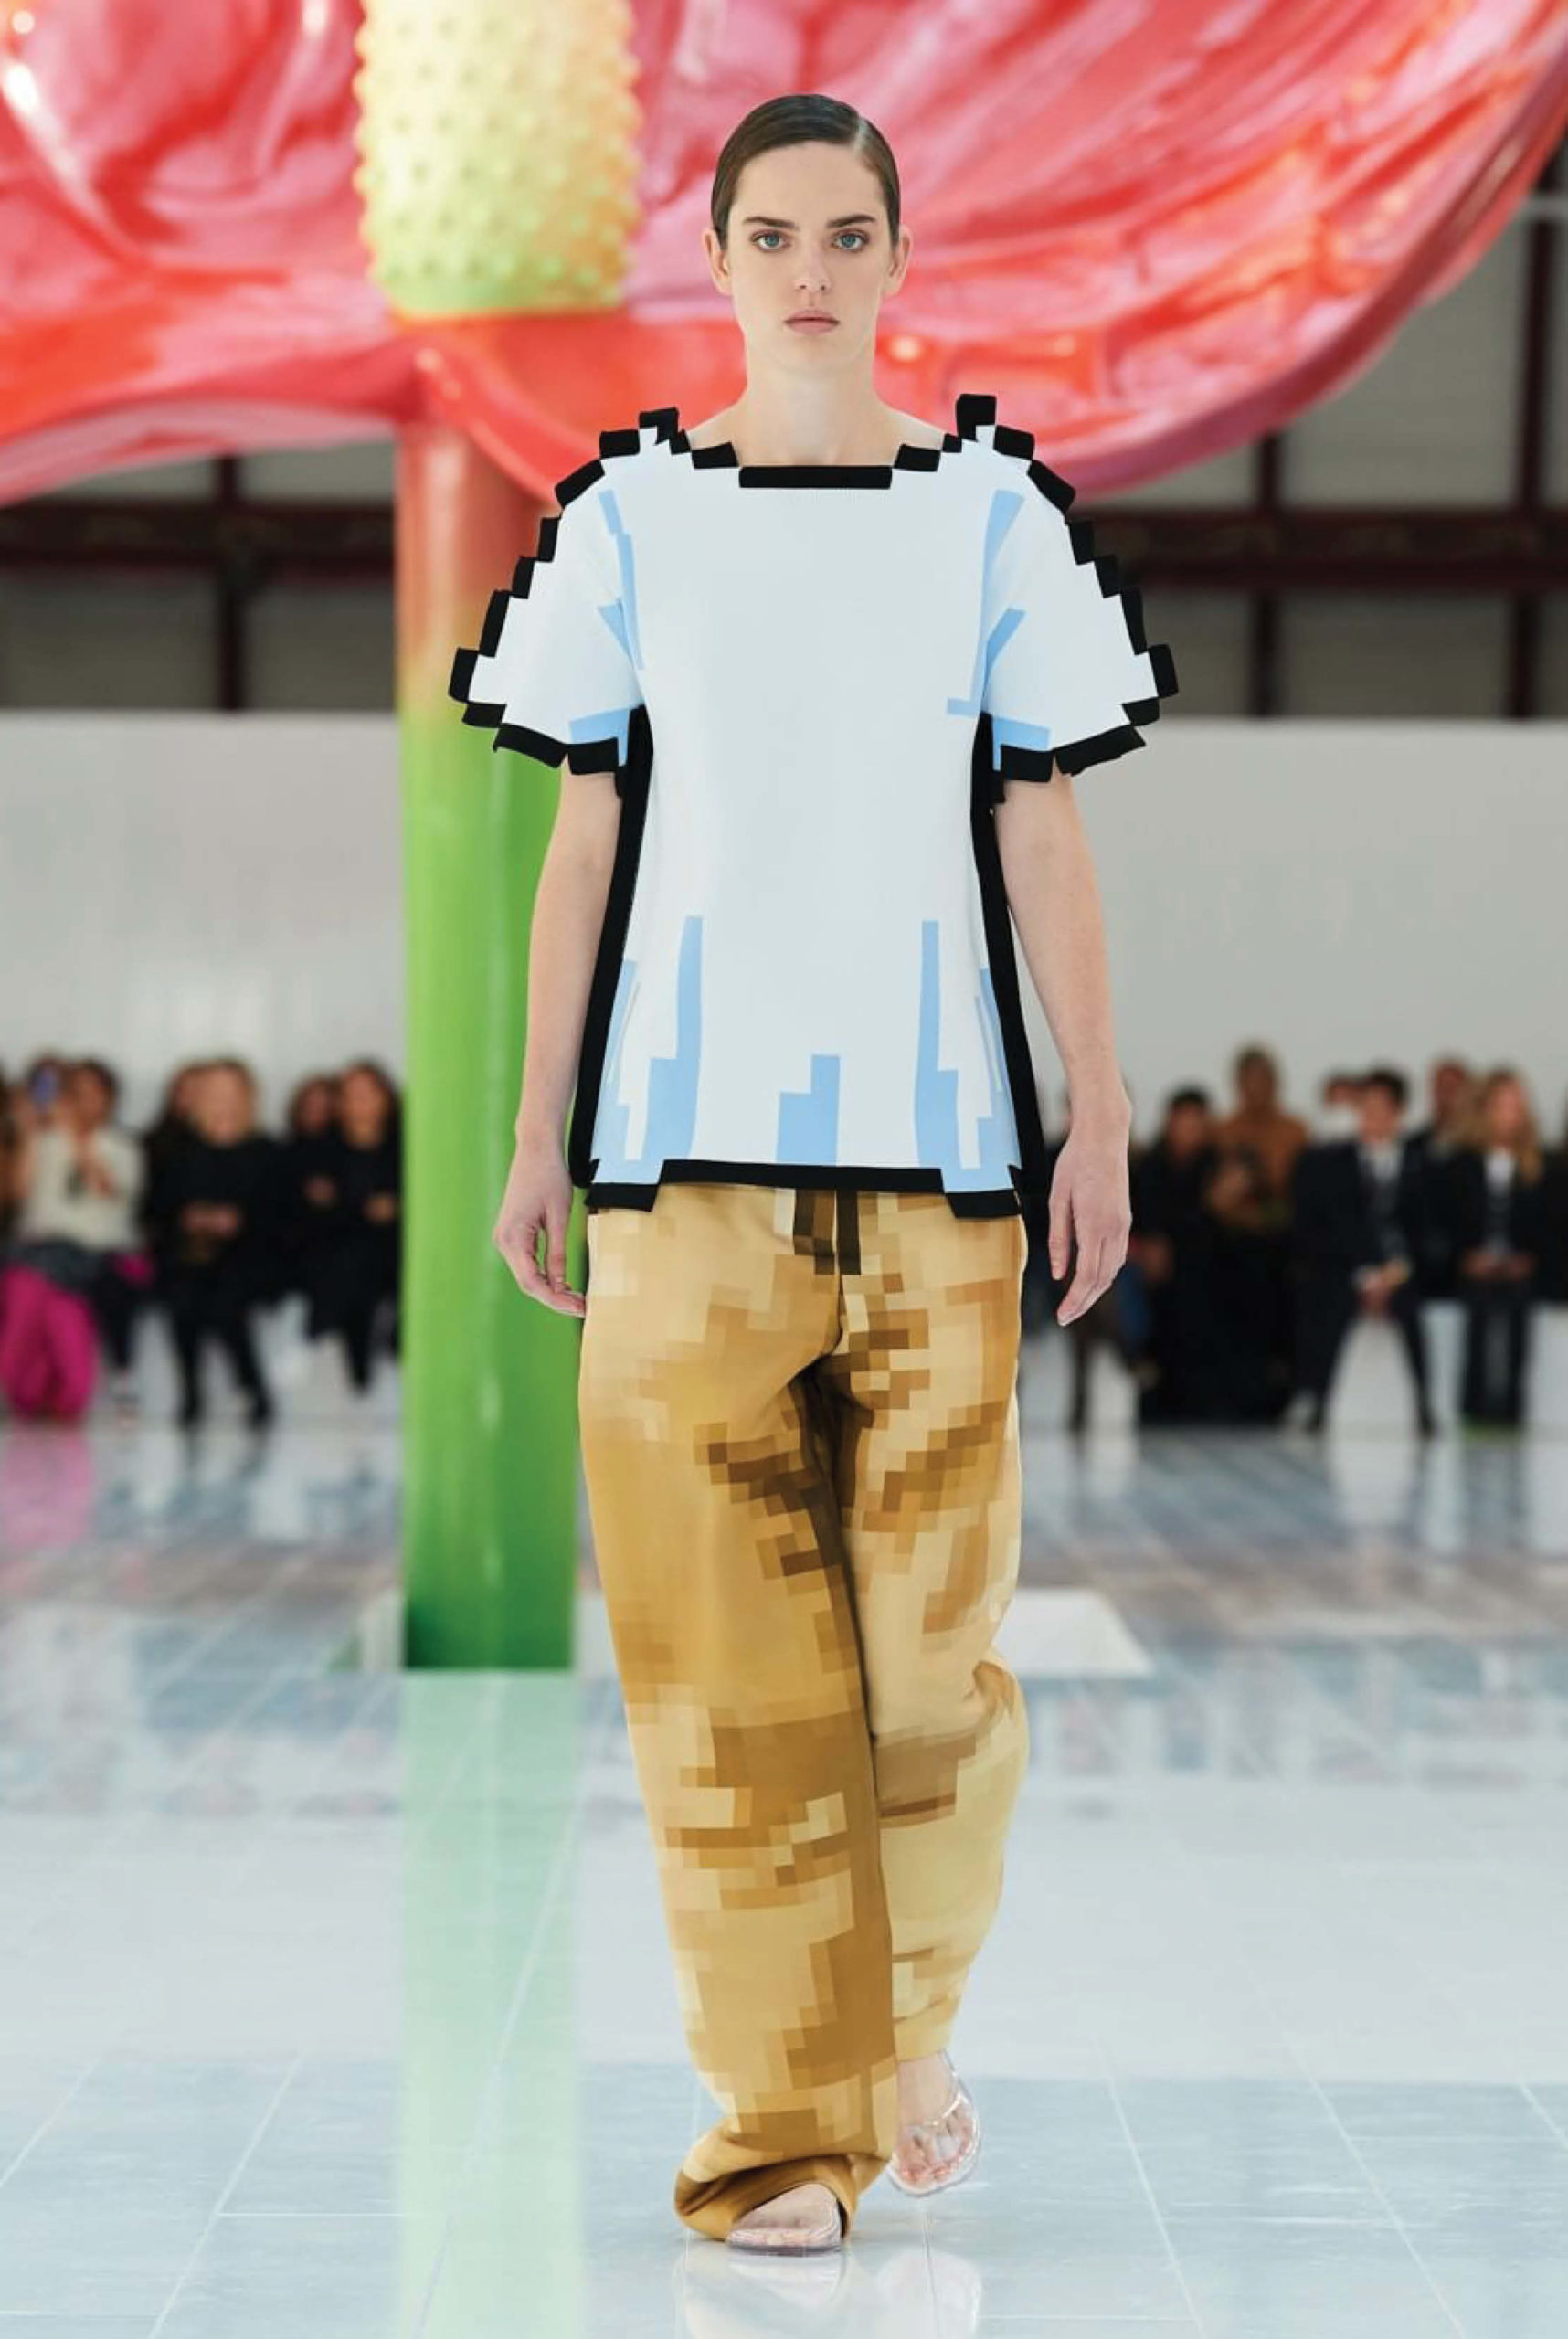 Hyperreality fashion by MSCHF Minecraft inspired pixelated pieces